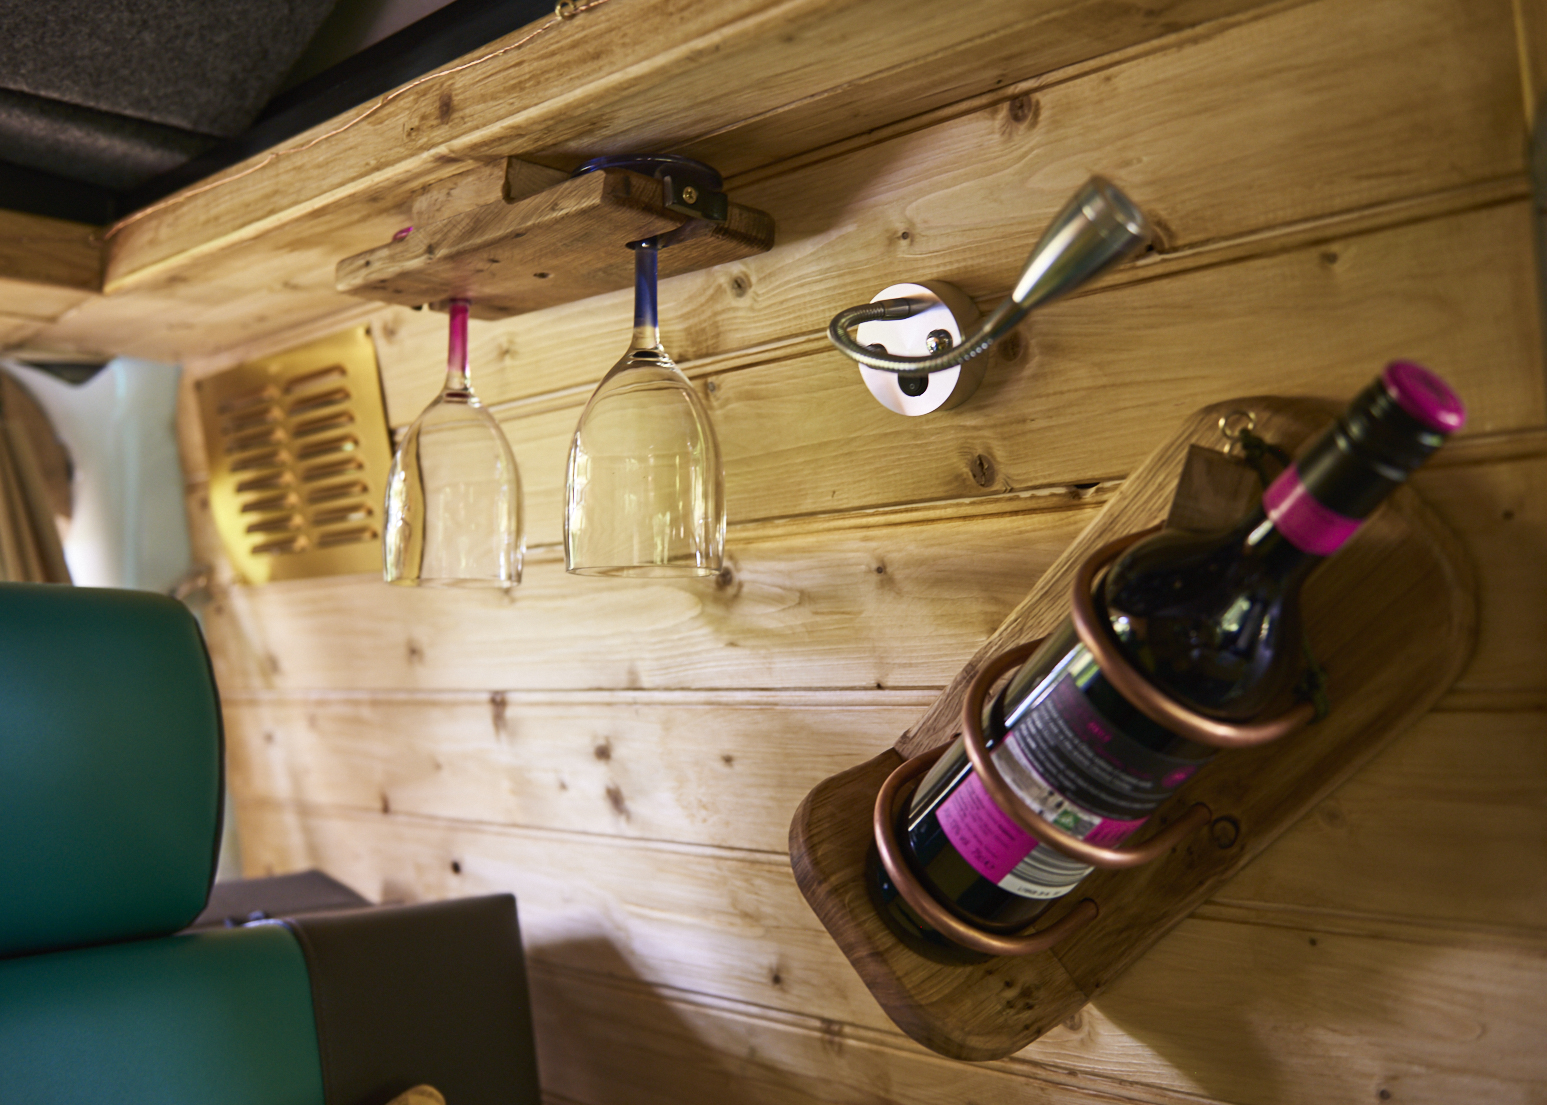 A close-up of a wooden interior wall of a camper van showcasing a compact wine storage solution. Two wine glasses hang upside down from a wooden rack, and a wine bottle is secured in a wall-mounted wooden holder. The background features light-colored wooden paneling and a metal hook.